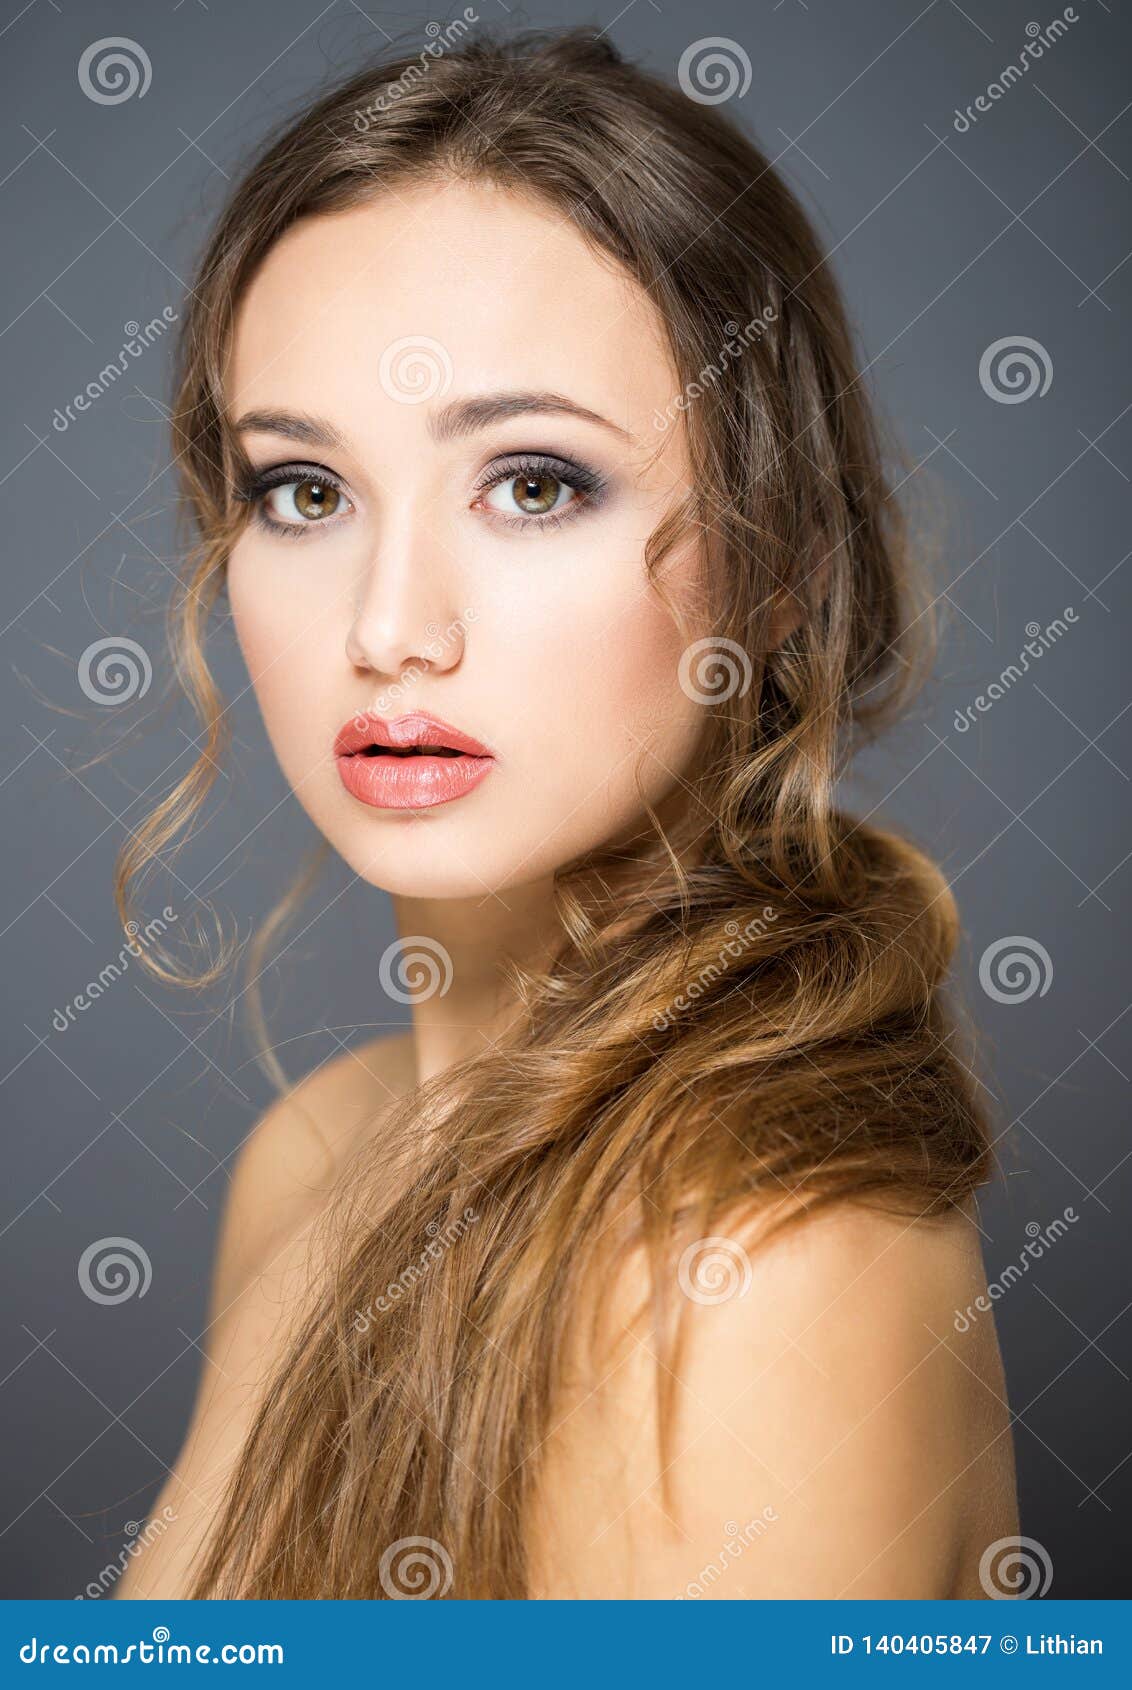 Brunette cosmetics beauty stock image. Image of face - 140405847